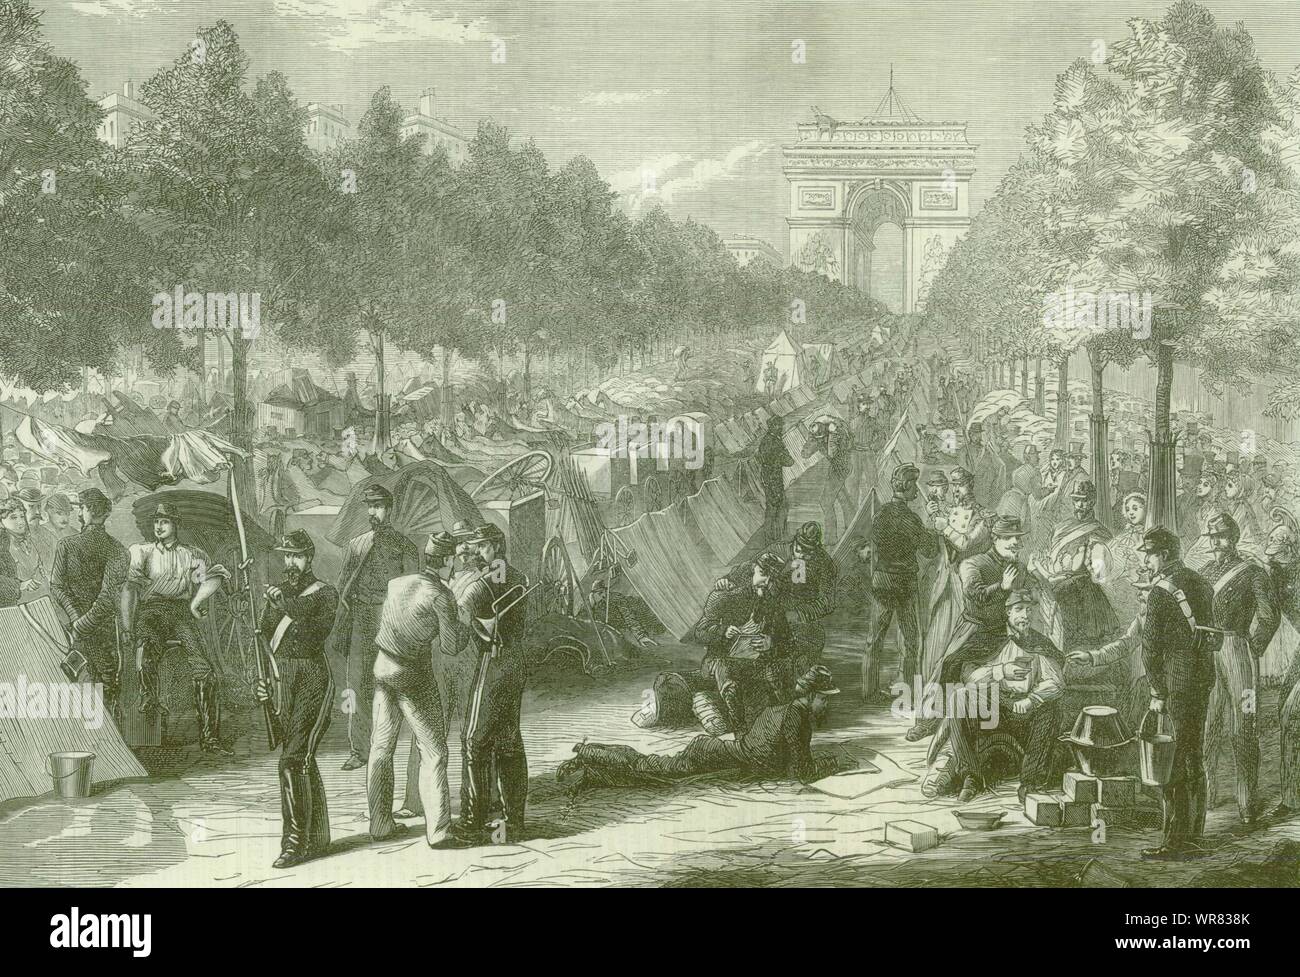 Franco-Prussian War: Troops encamped in the Champs Elysees, Paris 1870 Stock Photo